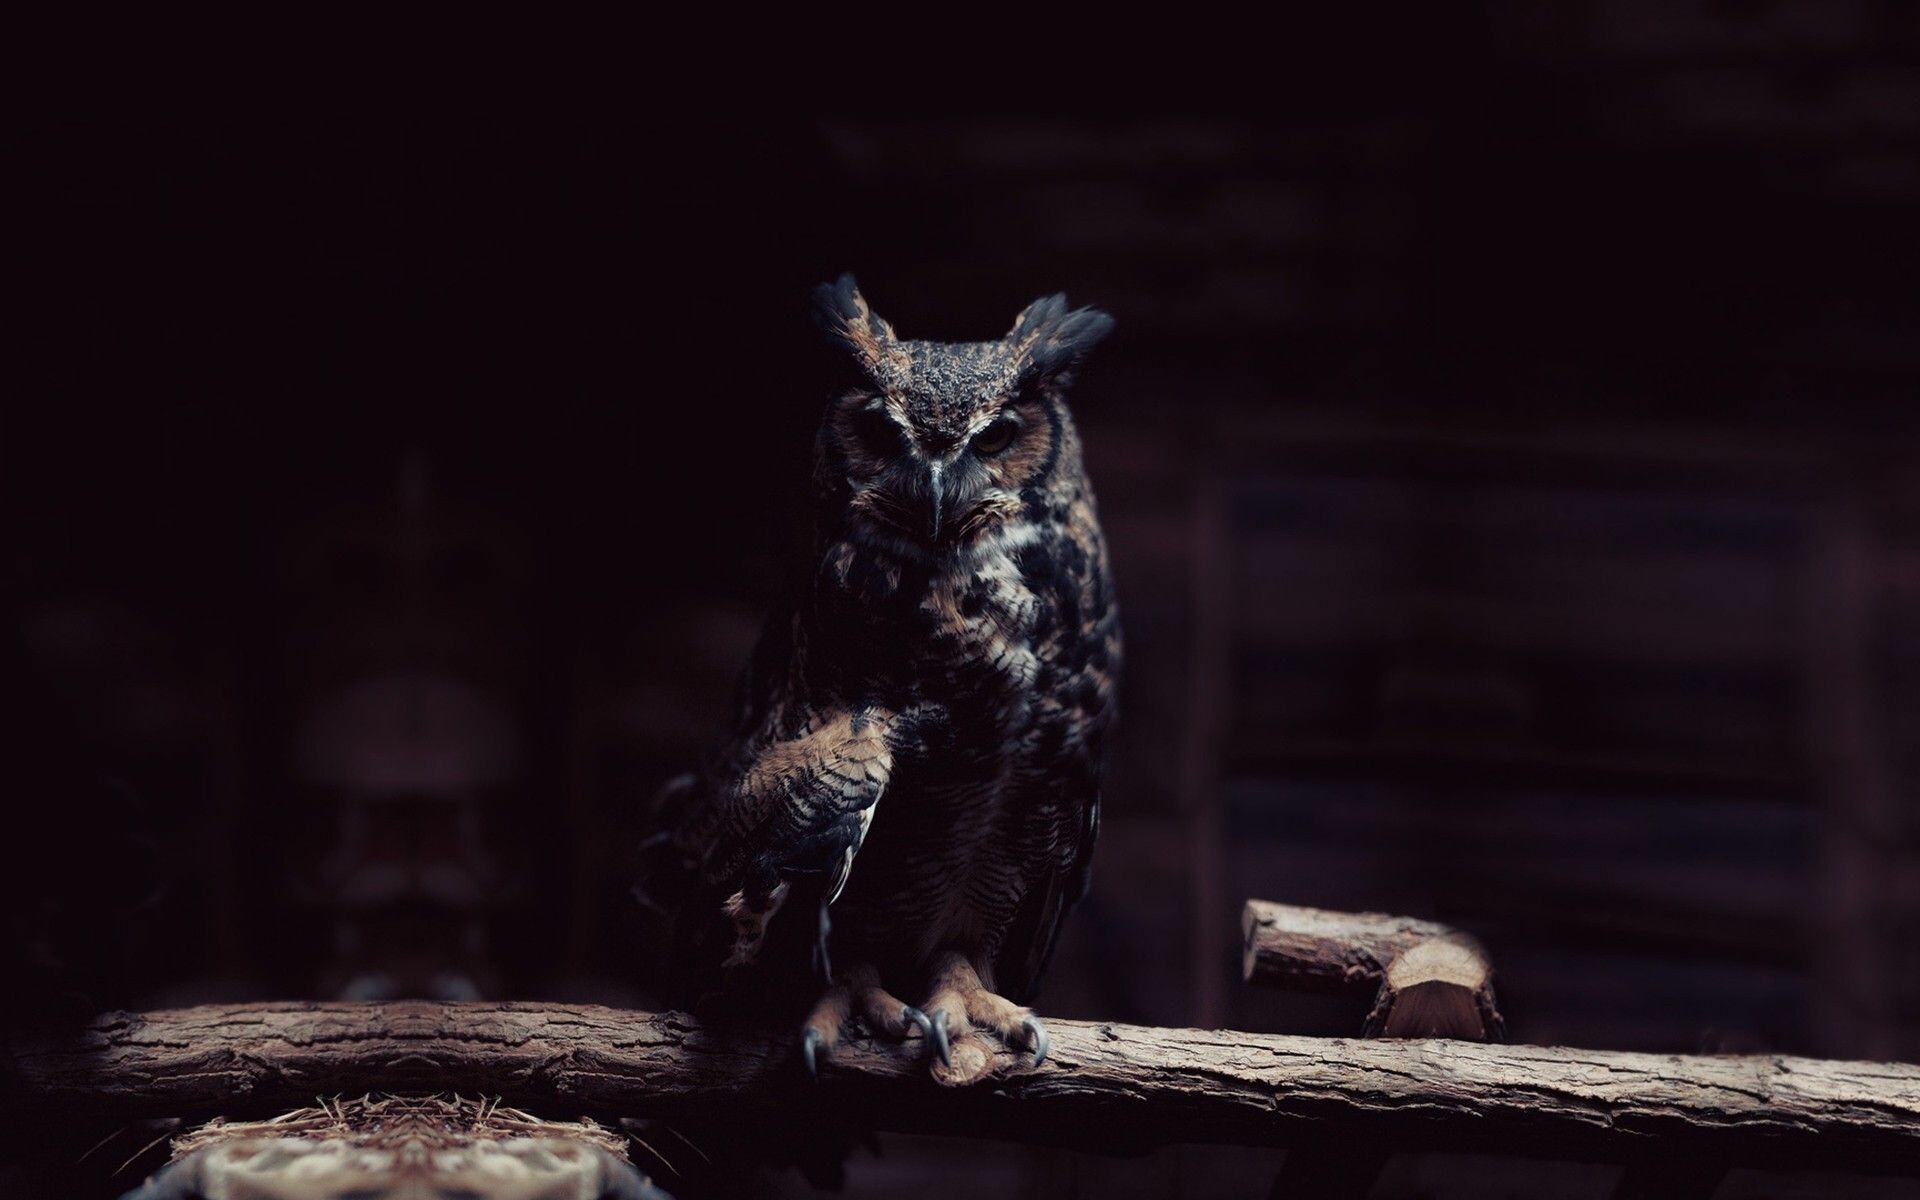 72+ Owl Wallpapers: HD, 4K, 5K for PC and Mobile | Download free images for  iPhone, Android